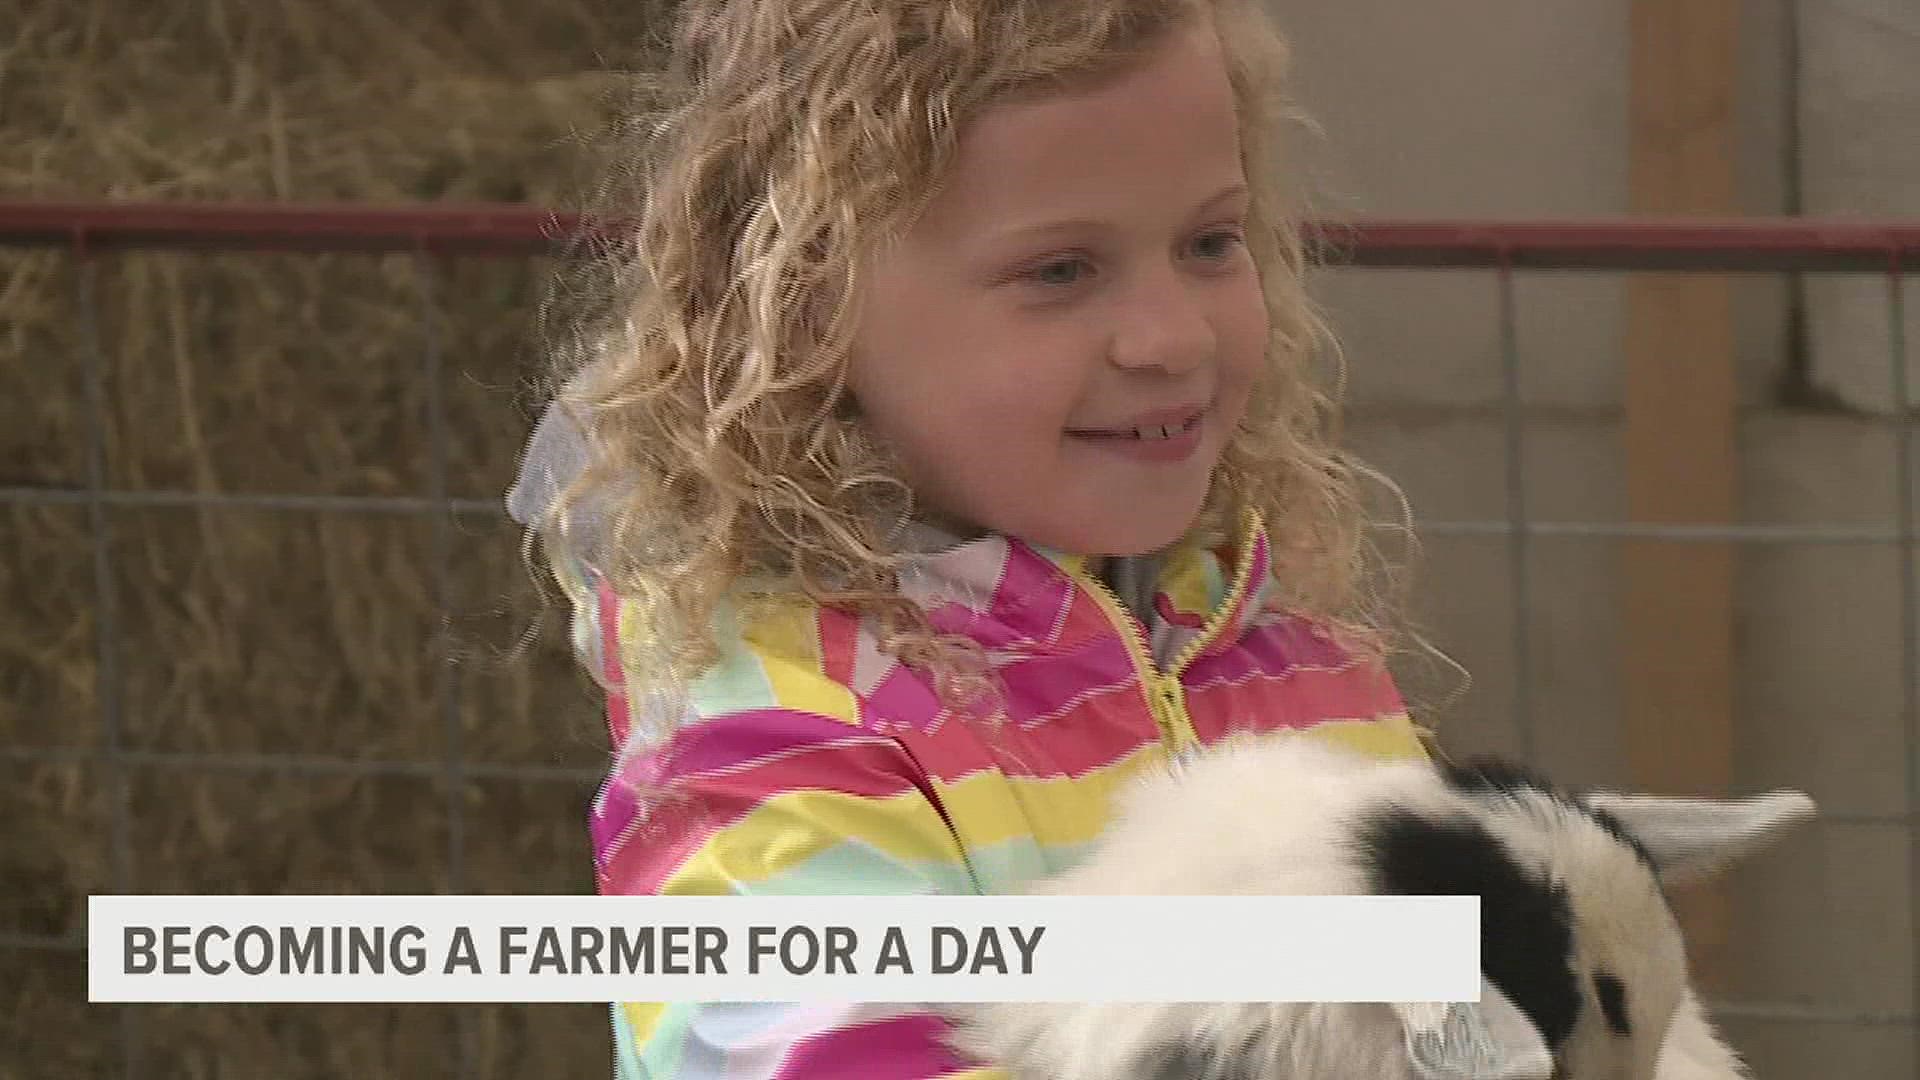 9-year-old Bella has congenital heart disease and her wish was to spend a day at a farm.